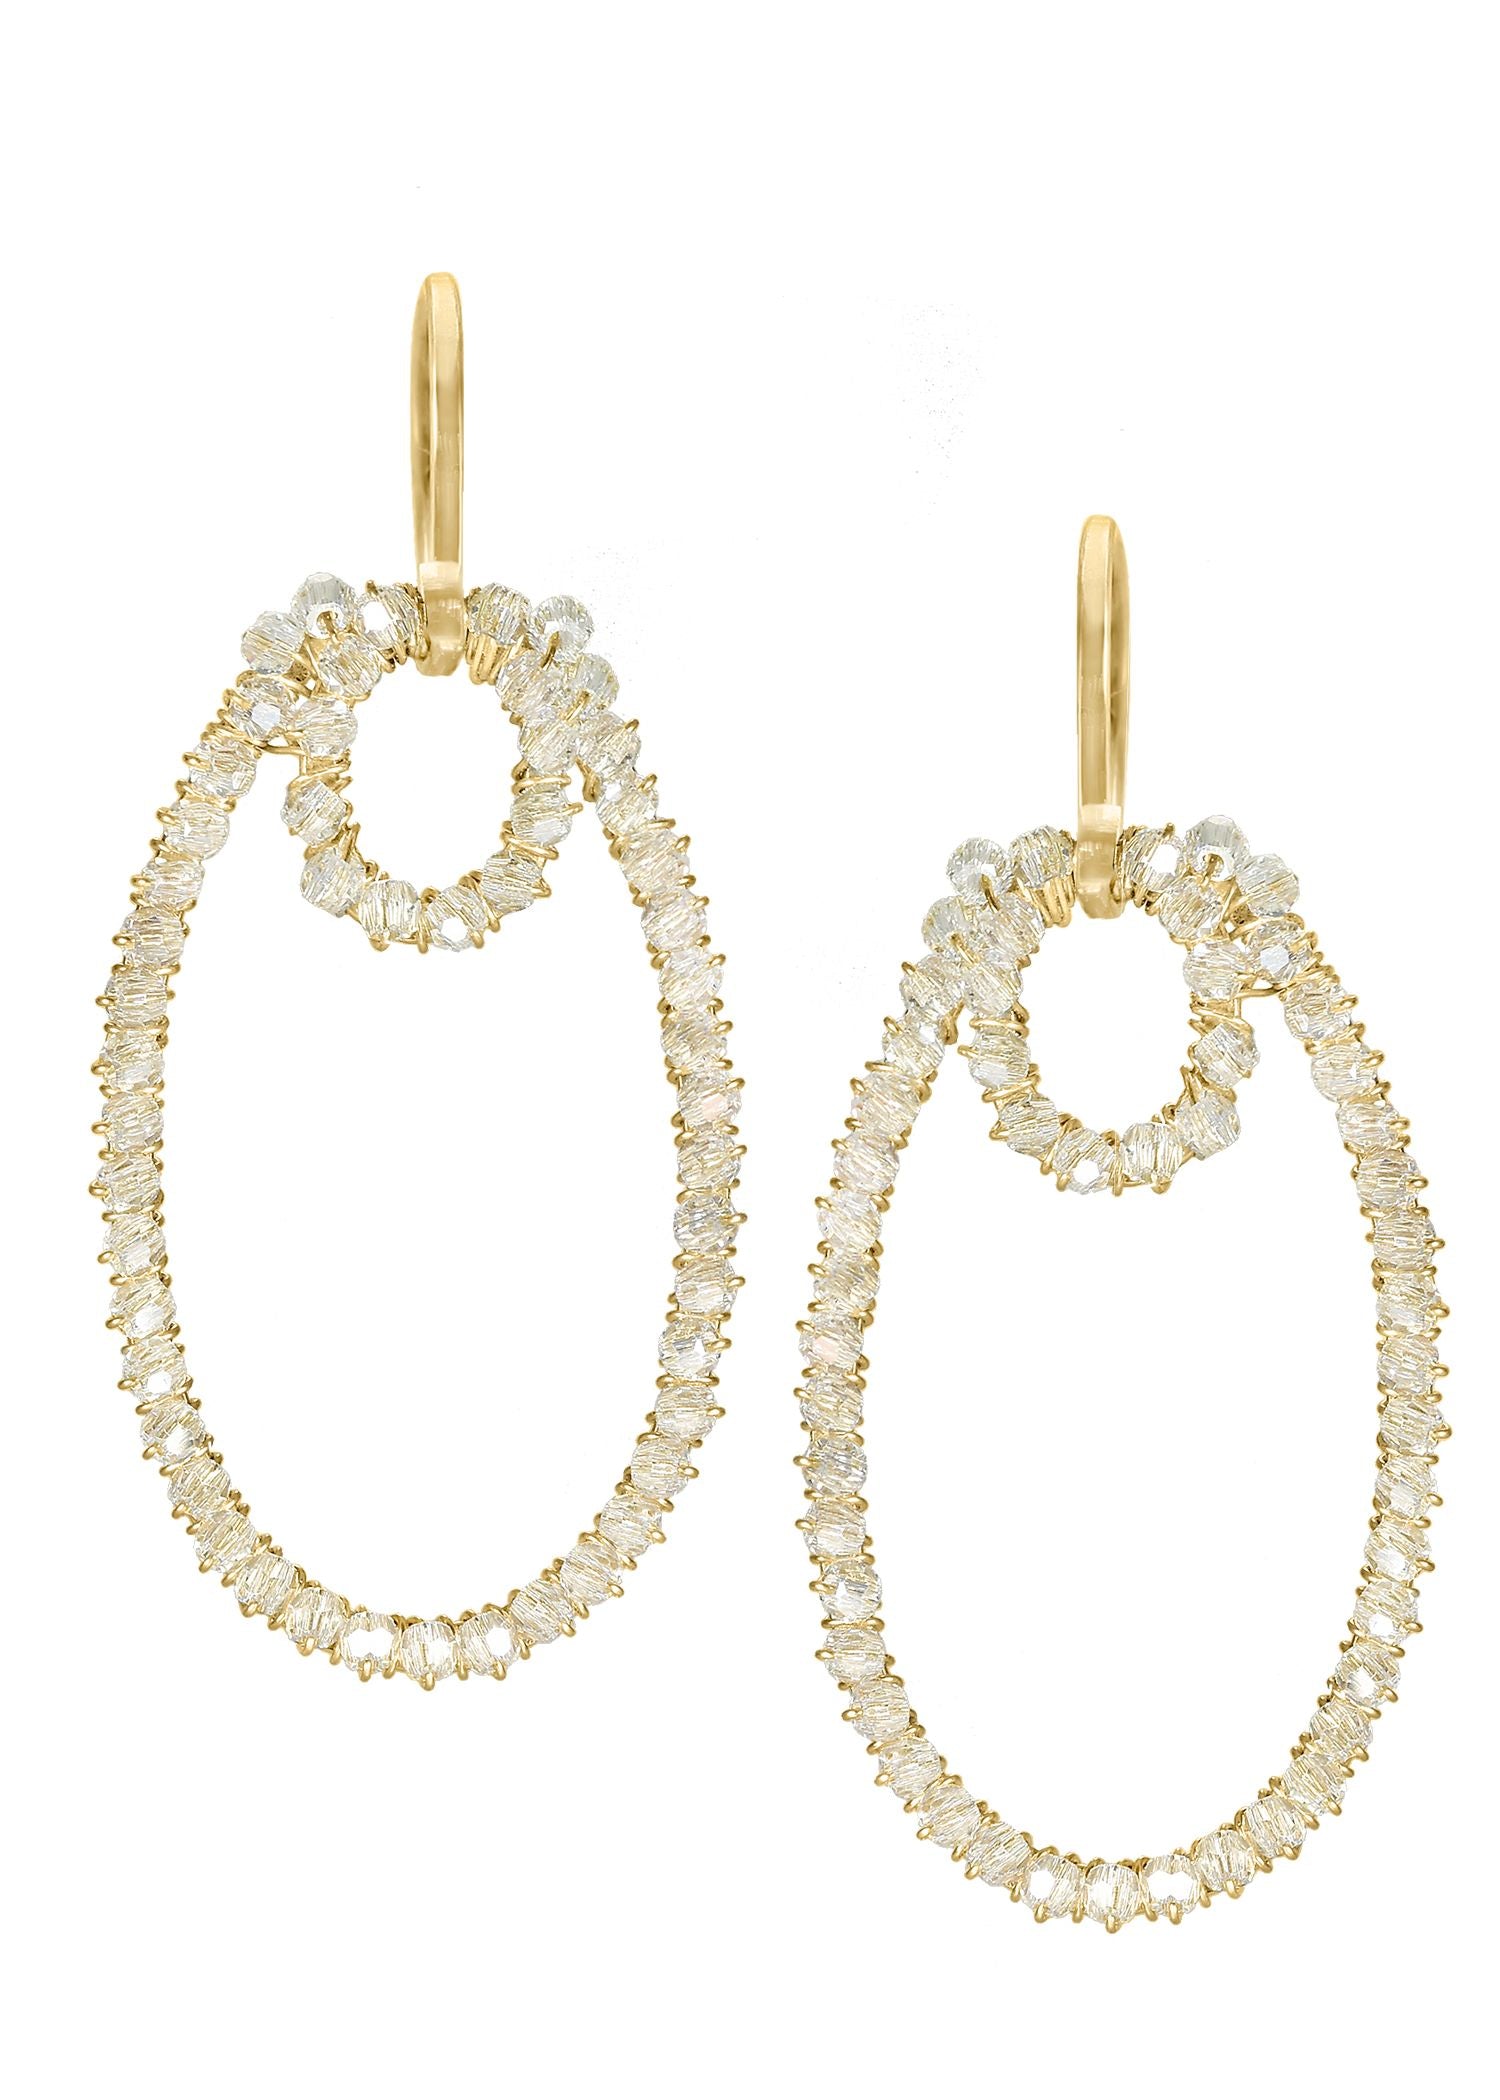 Crystal 14k gold fill Earrings measure 1-3/4" in length (including ear wires) and 3/4" in width Handmade in our Los Angeles studio